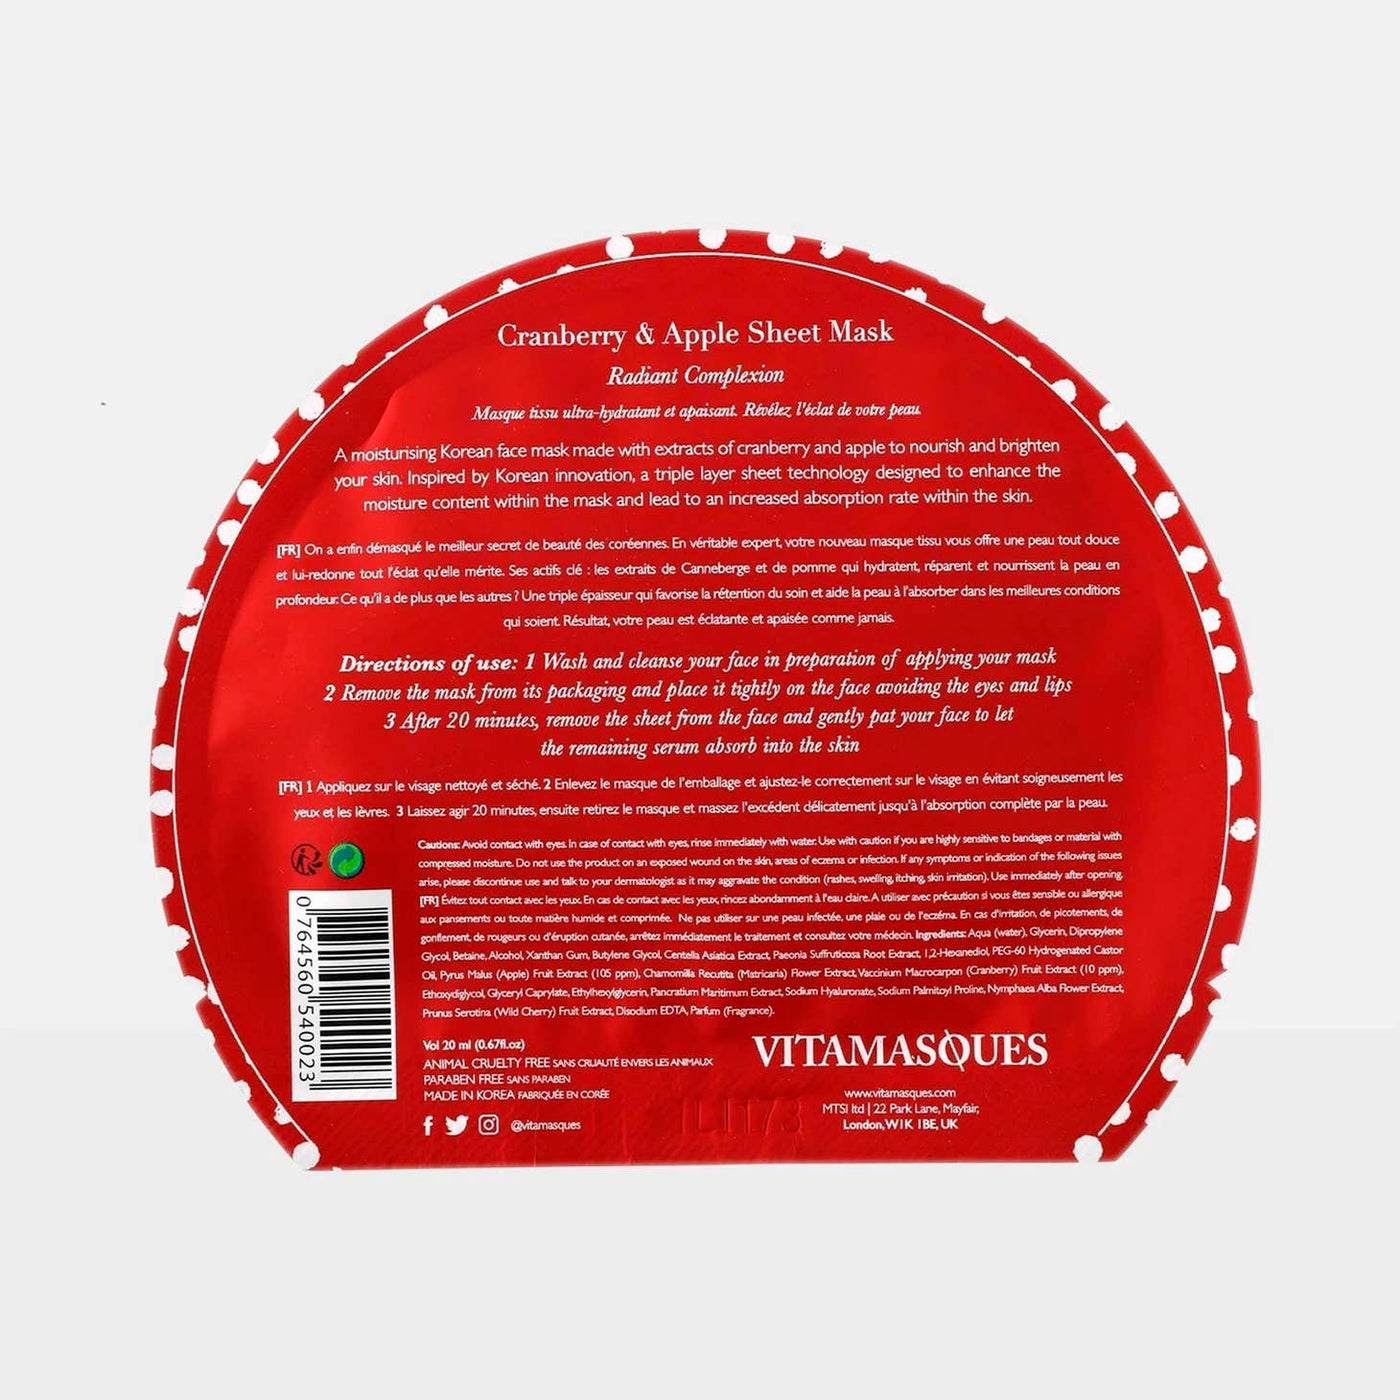 Cranberry & Apple Repair Face Mask by Vitamasques